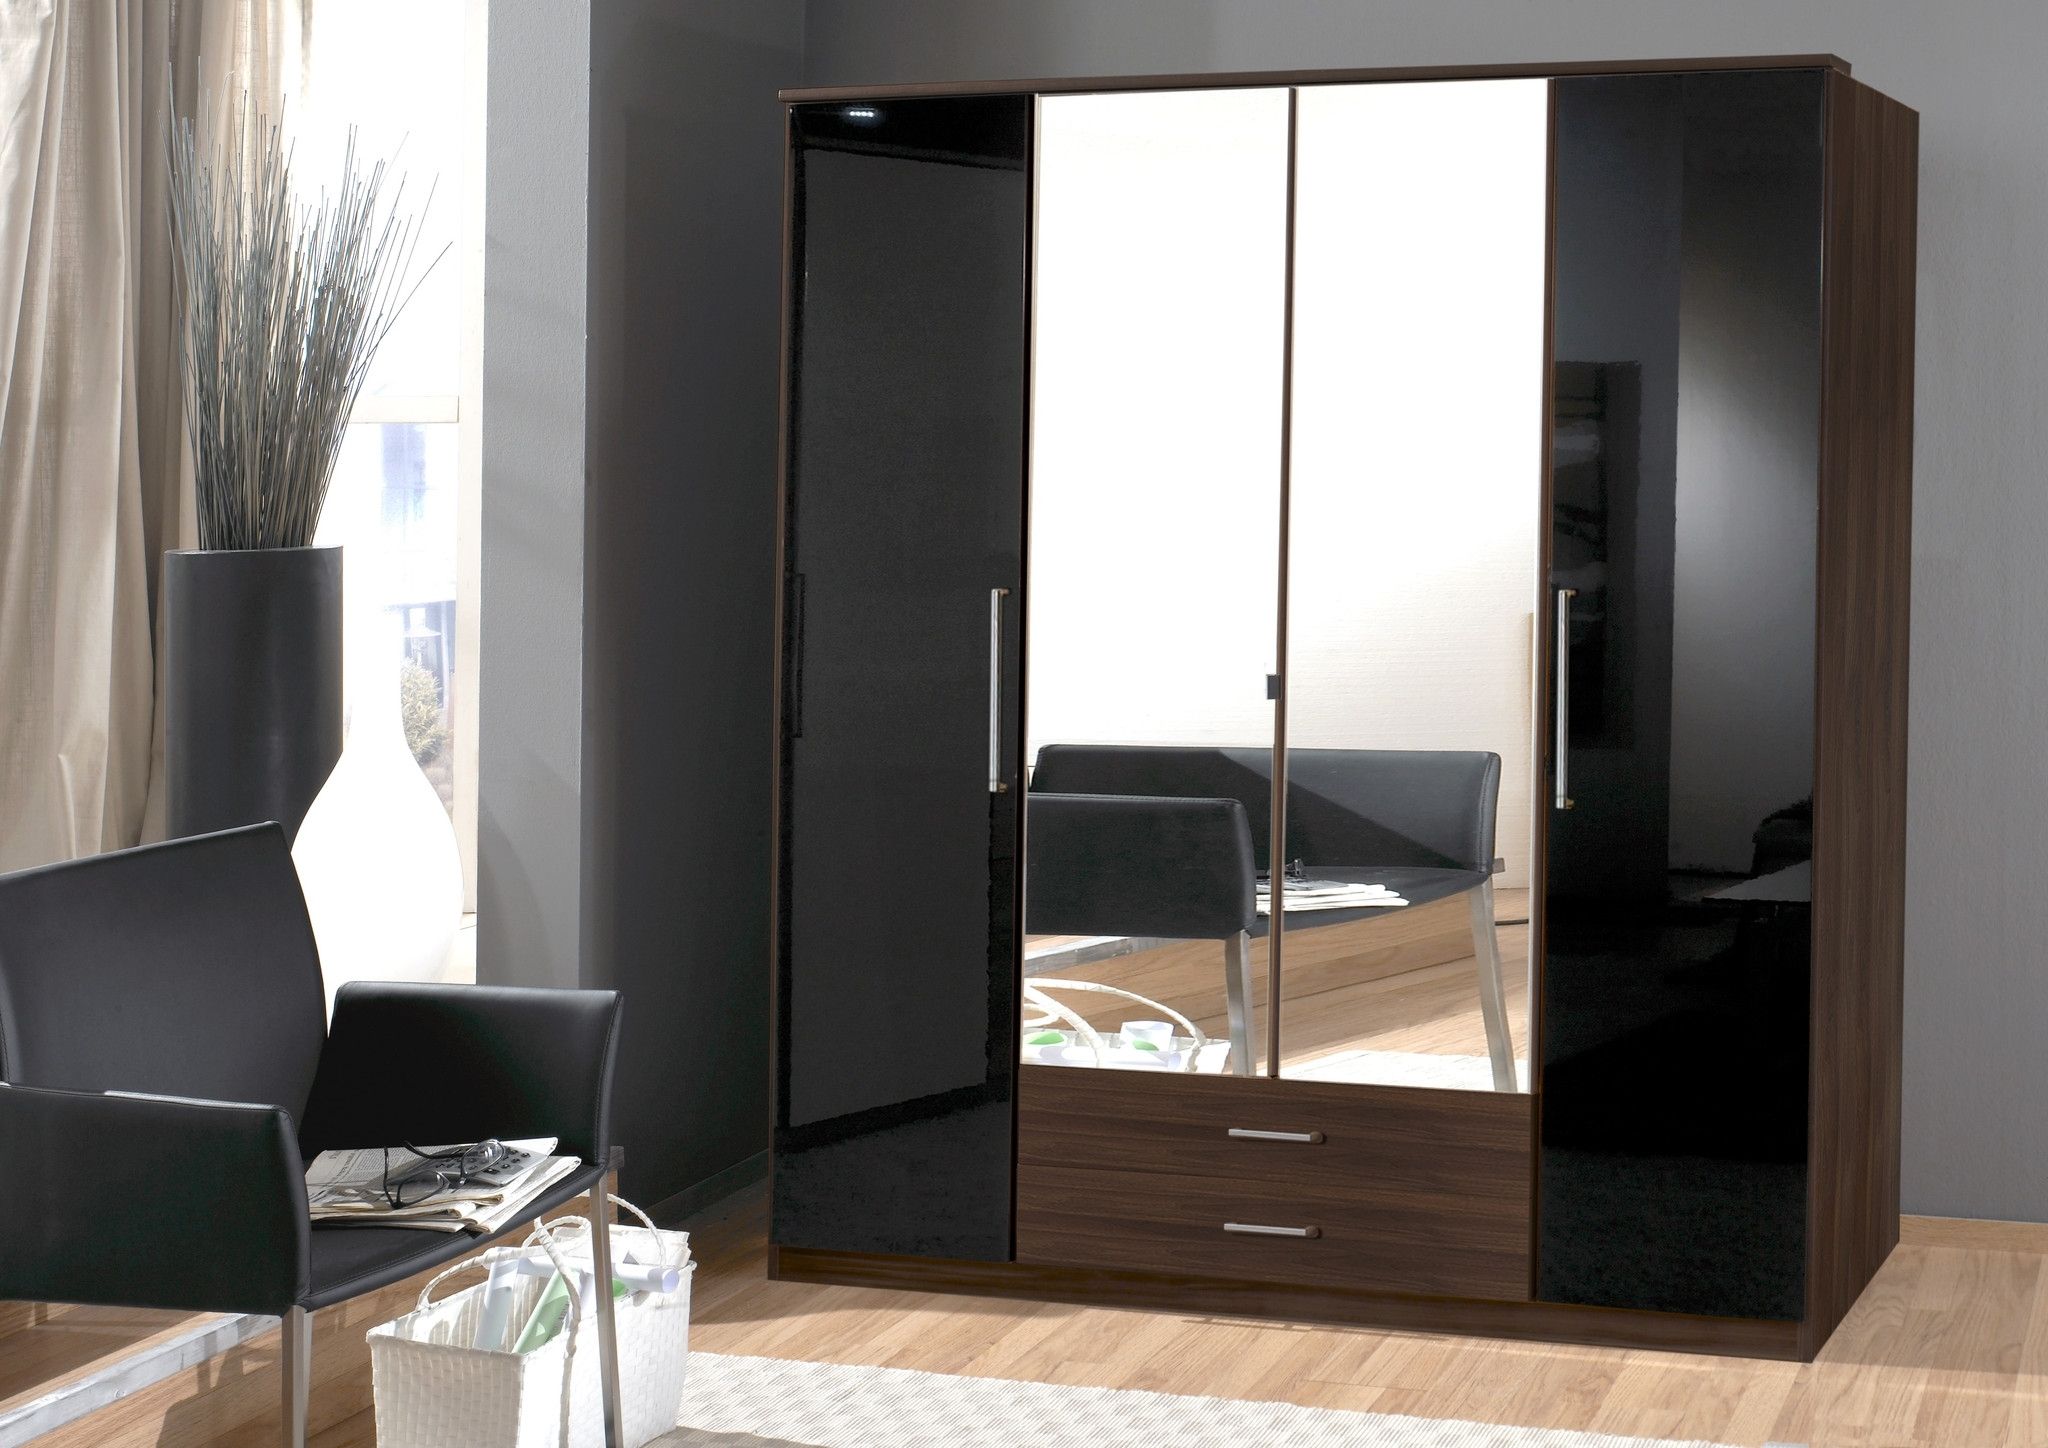 High Gloss Black Wardrobes Throughout Most Recent White High Gloss Sliding Wardrobe Doors Black Wardrobes That Can (View 7 of 15)